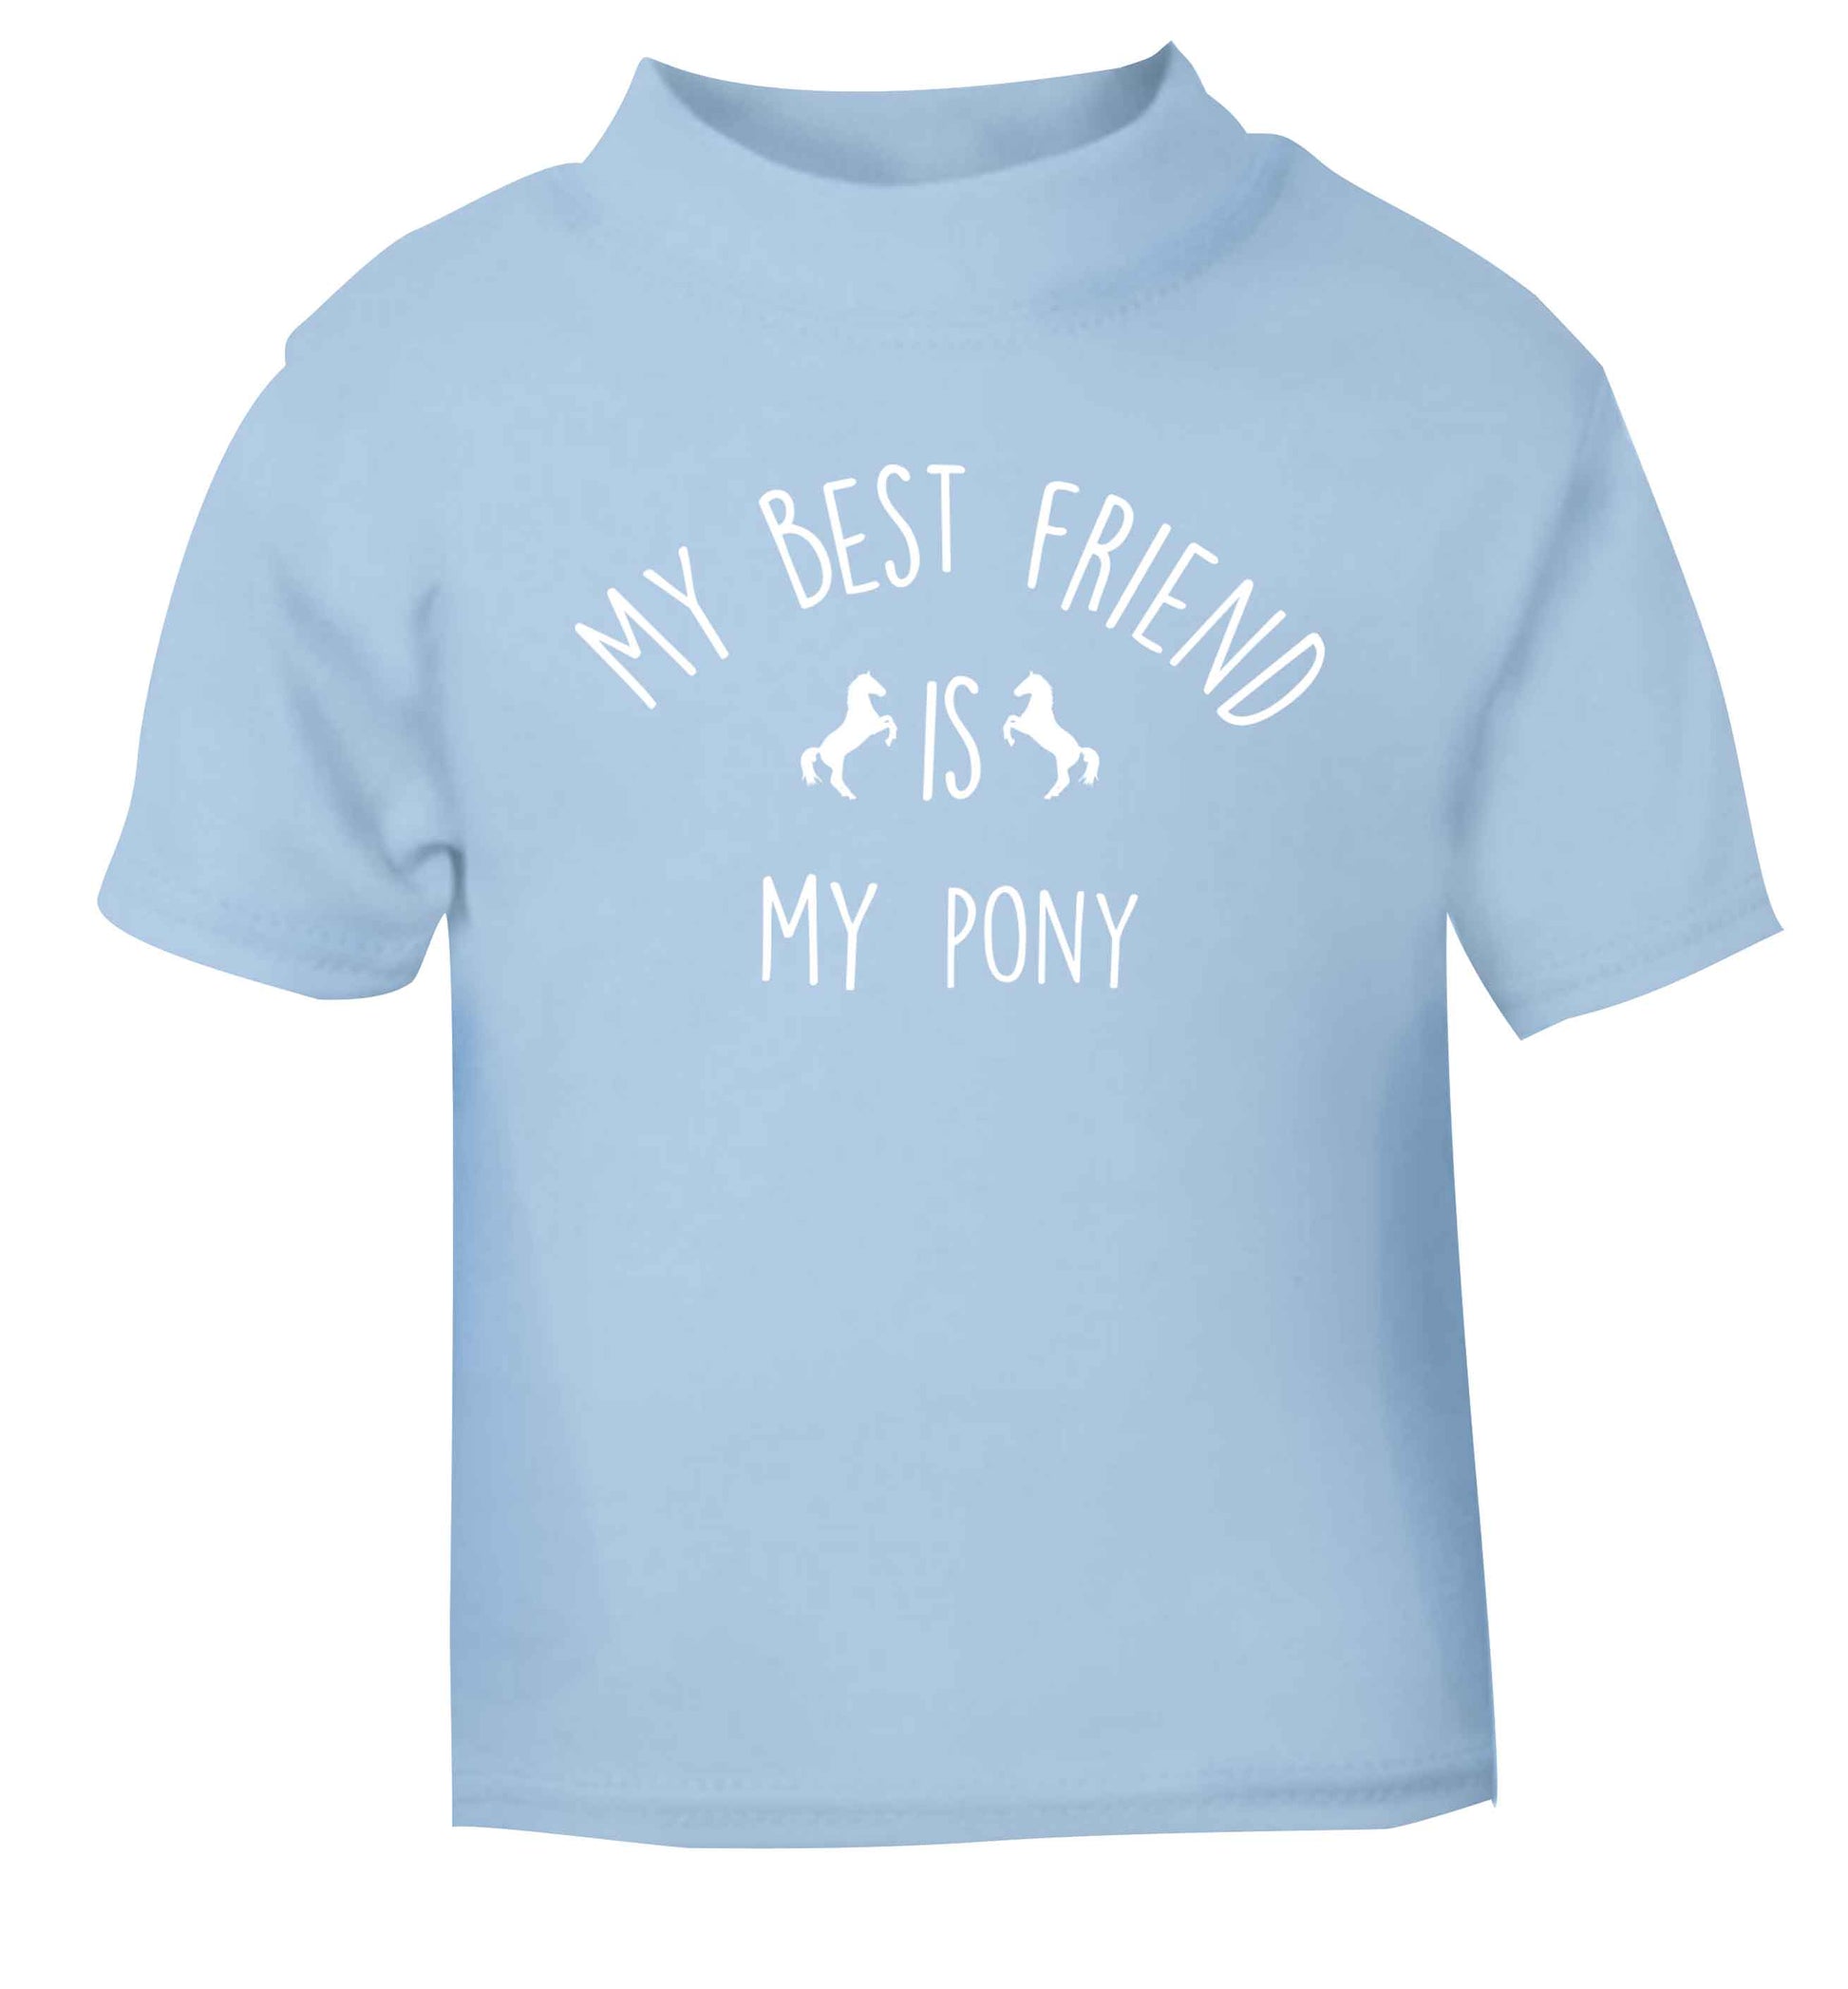 My best friend is my pony light blue baby toddler Tshirt 2 Years